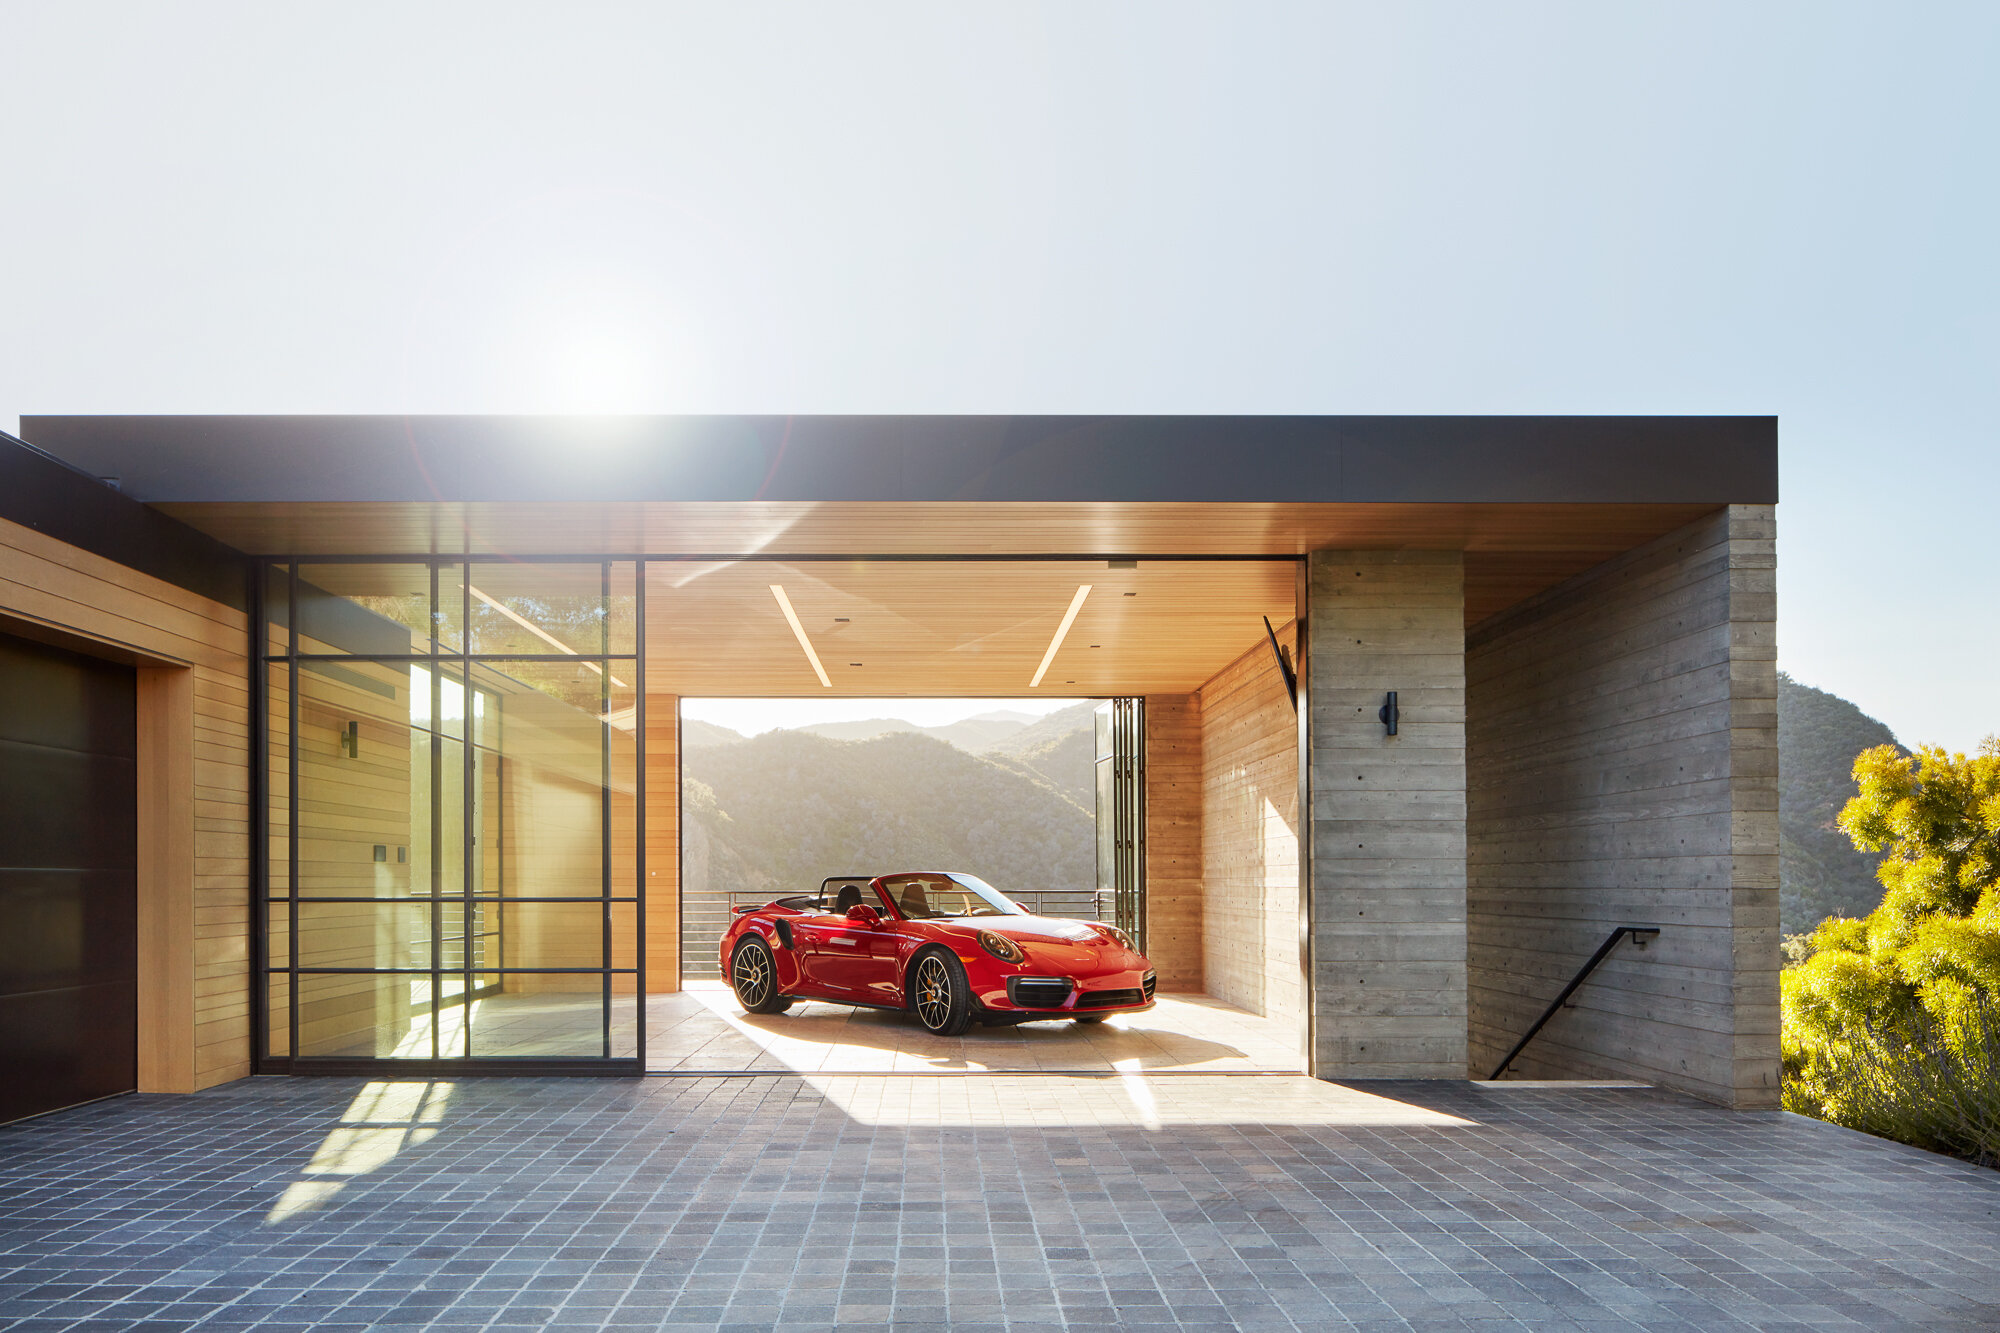  Custom luxury home general contractor built modern private residence in the Pacific Palisades neighborhood of Los Angeles featuring high end living room garage for vintage car collection with architectural qualities.  